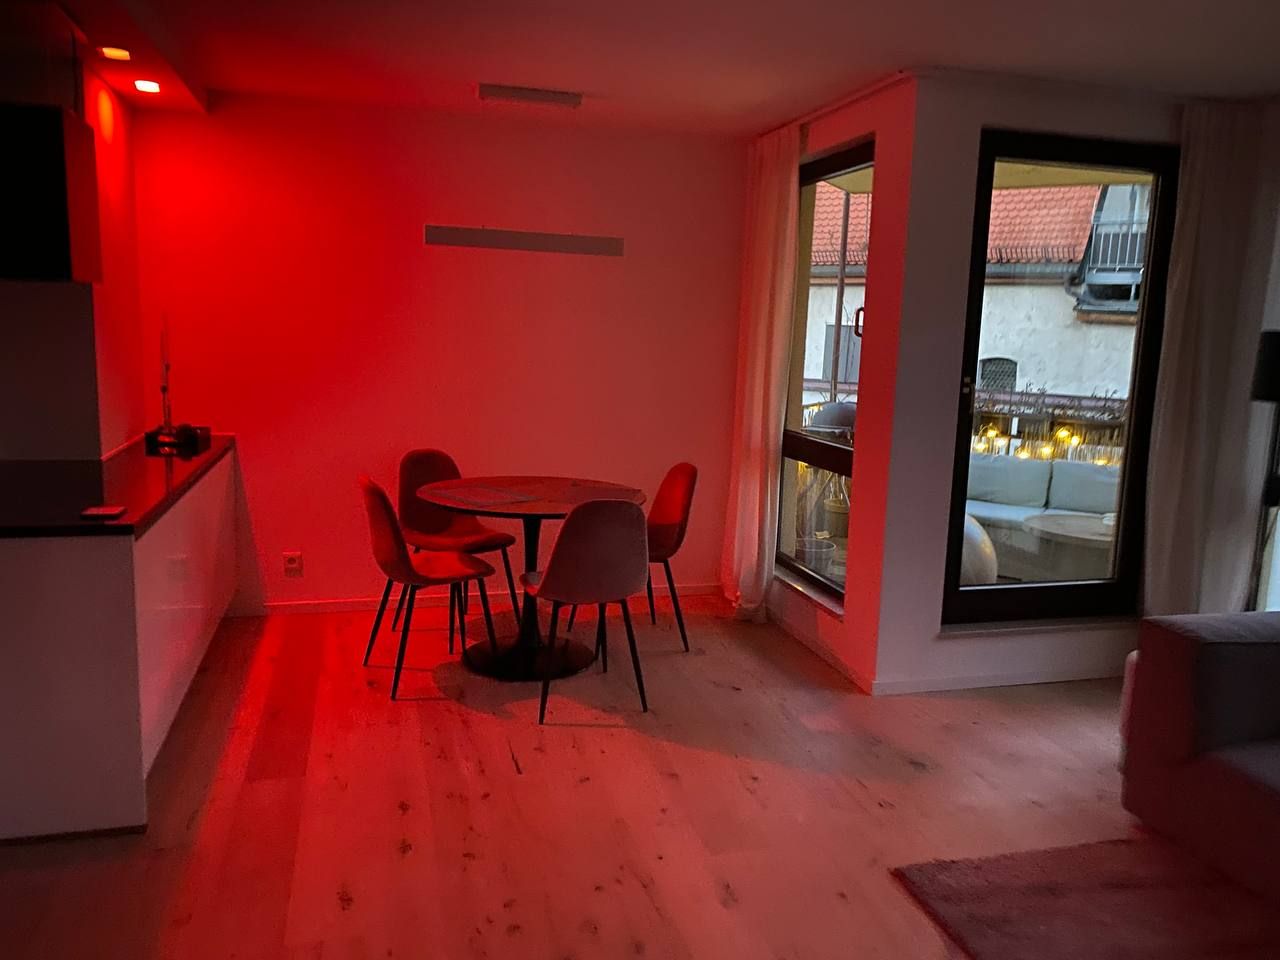 Modern design apartment in Munich's trendy district - centrally located, but very quiet!